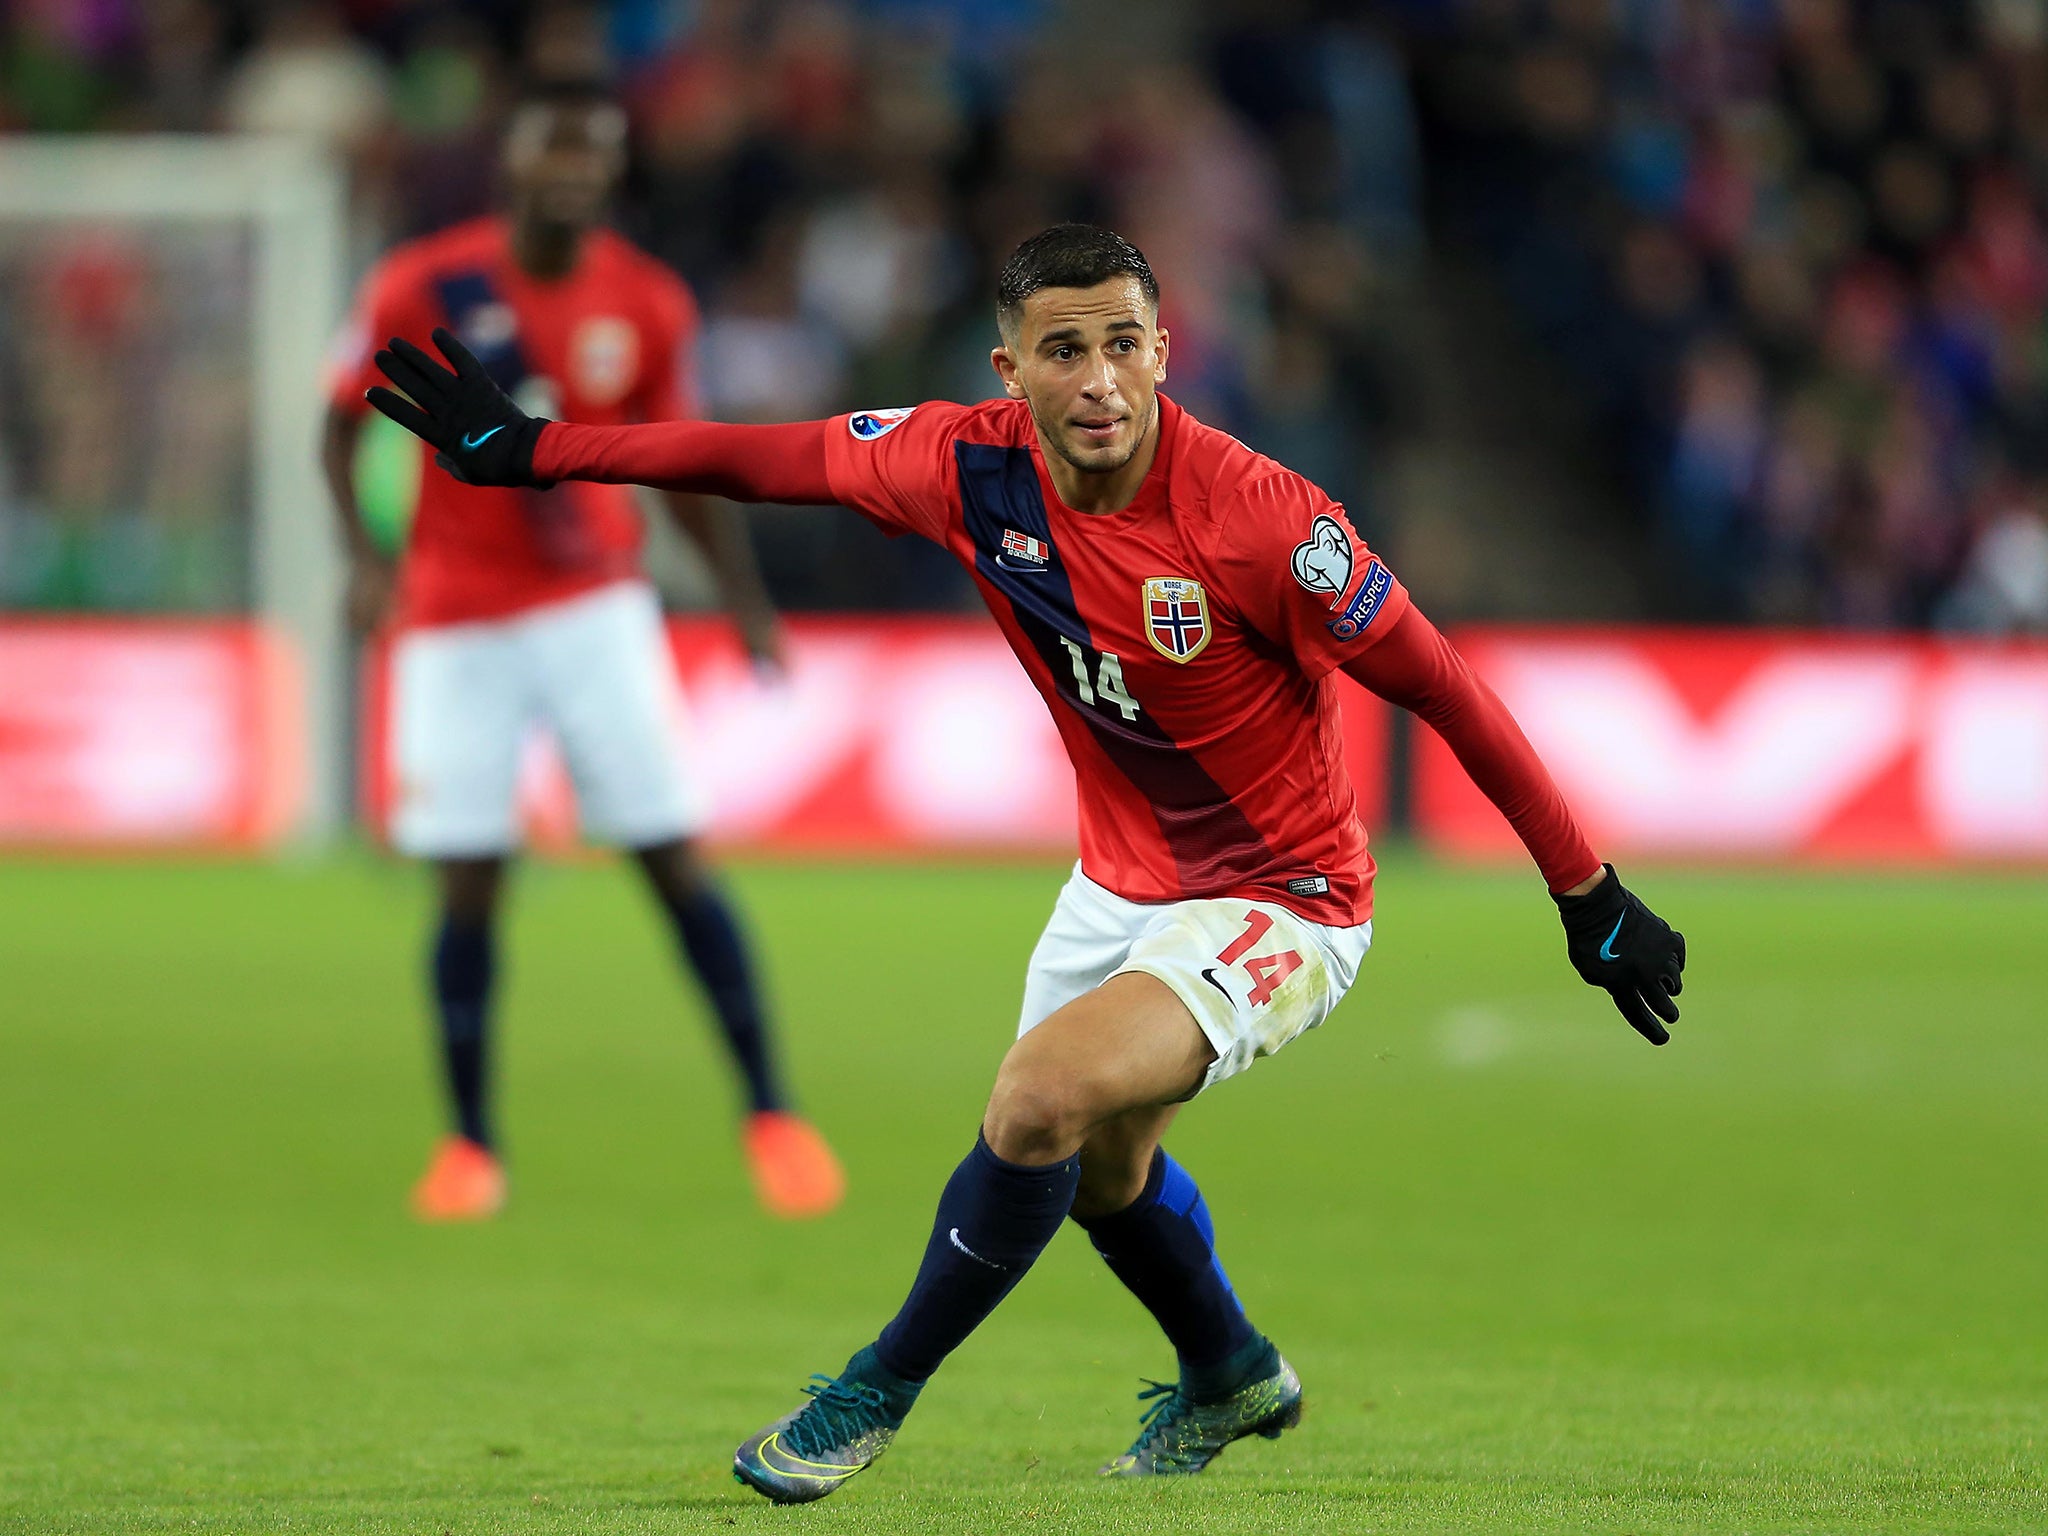 Omar Elabdellaoui could be on his way to Manchester United